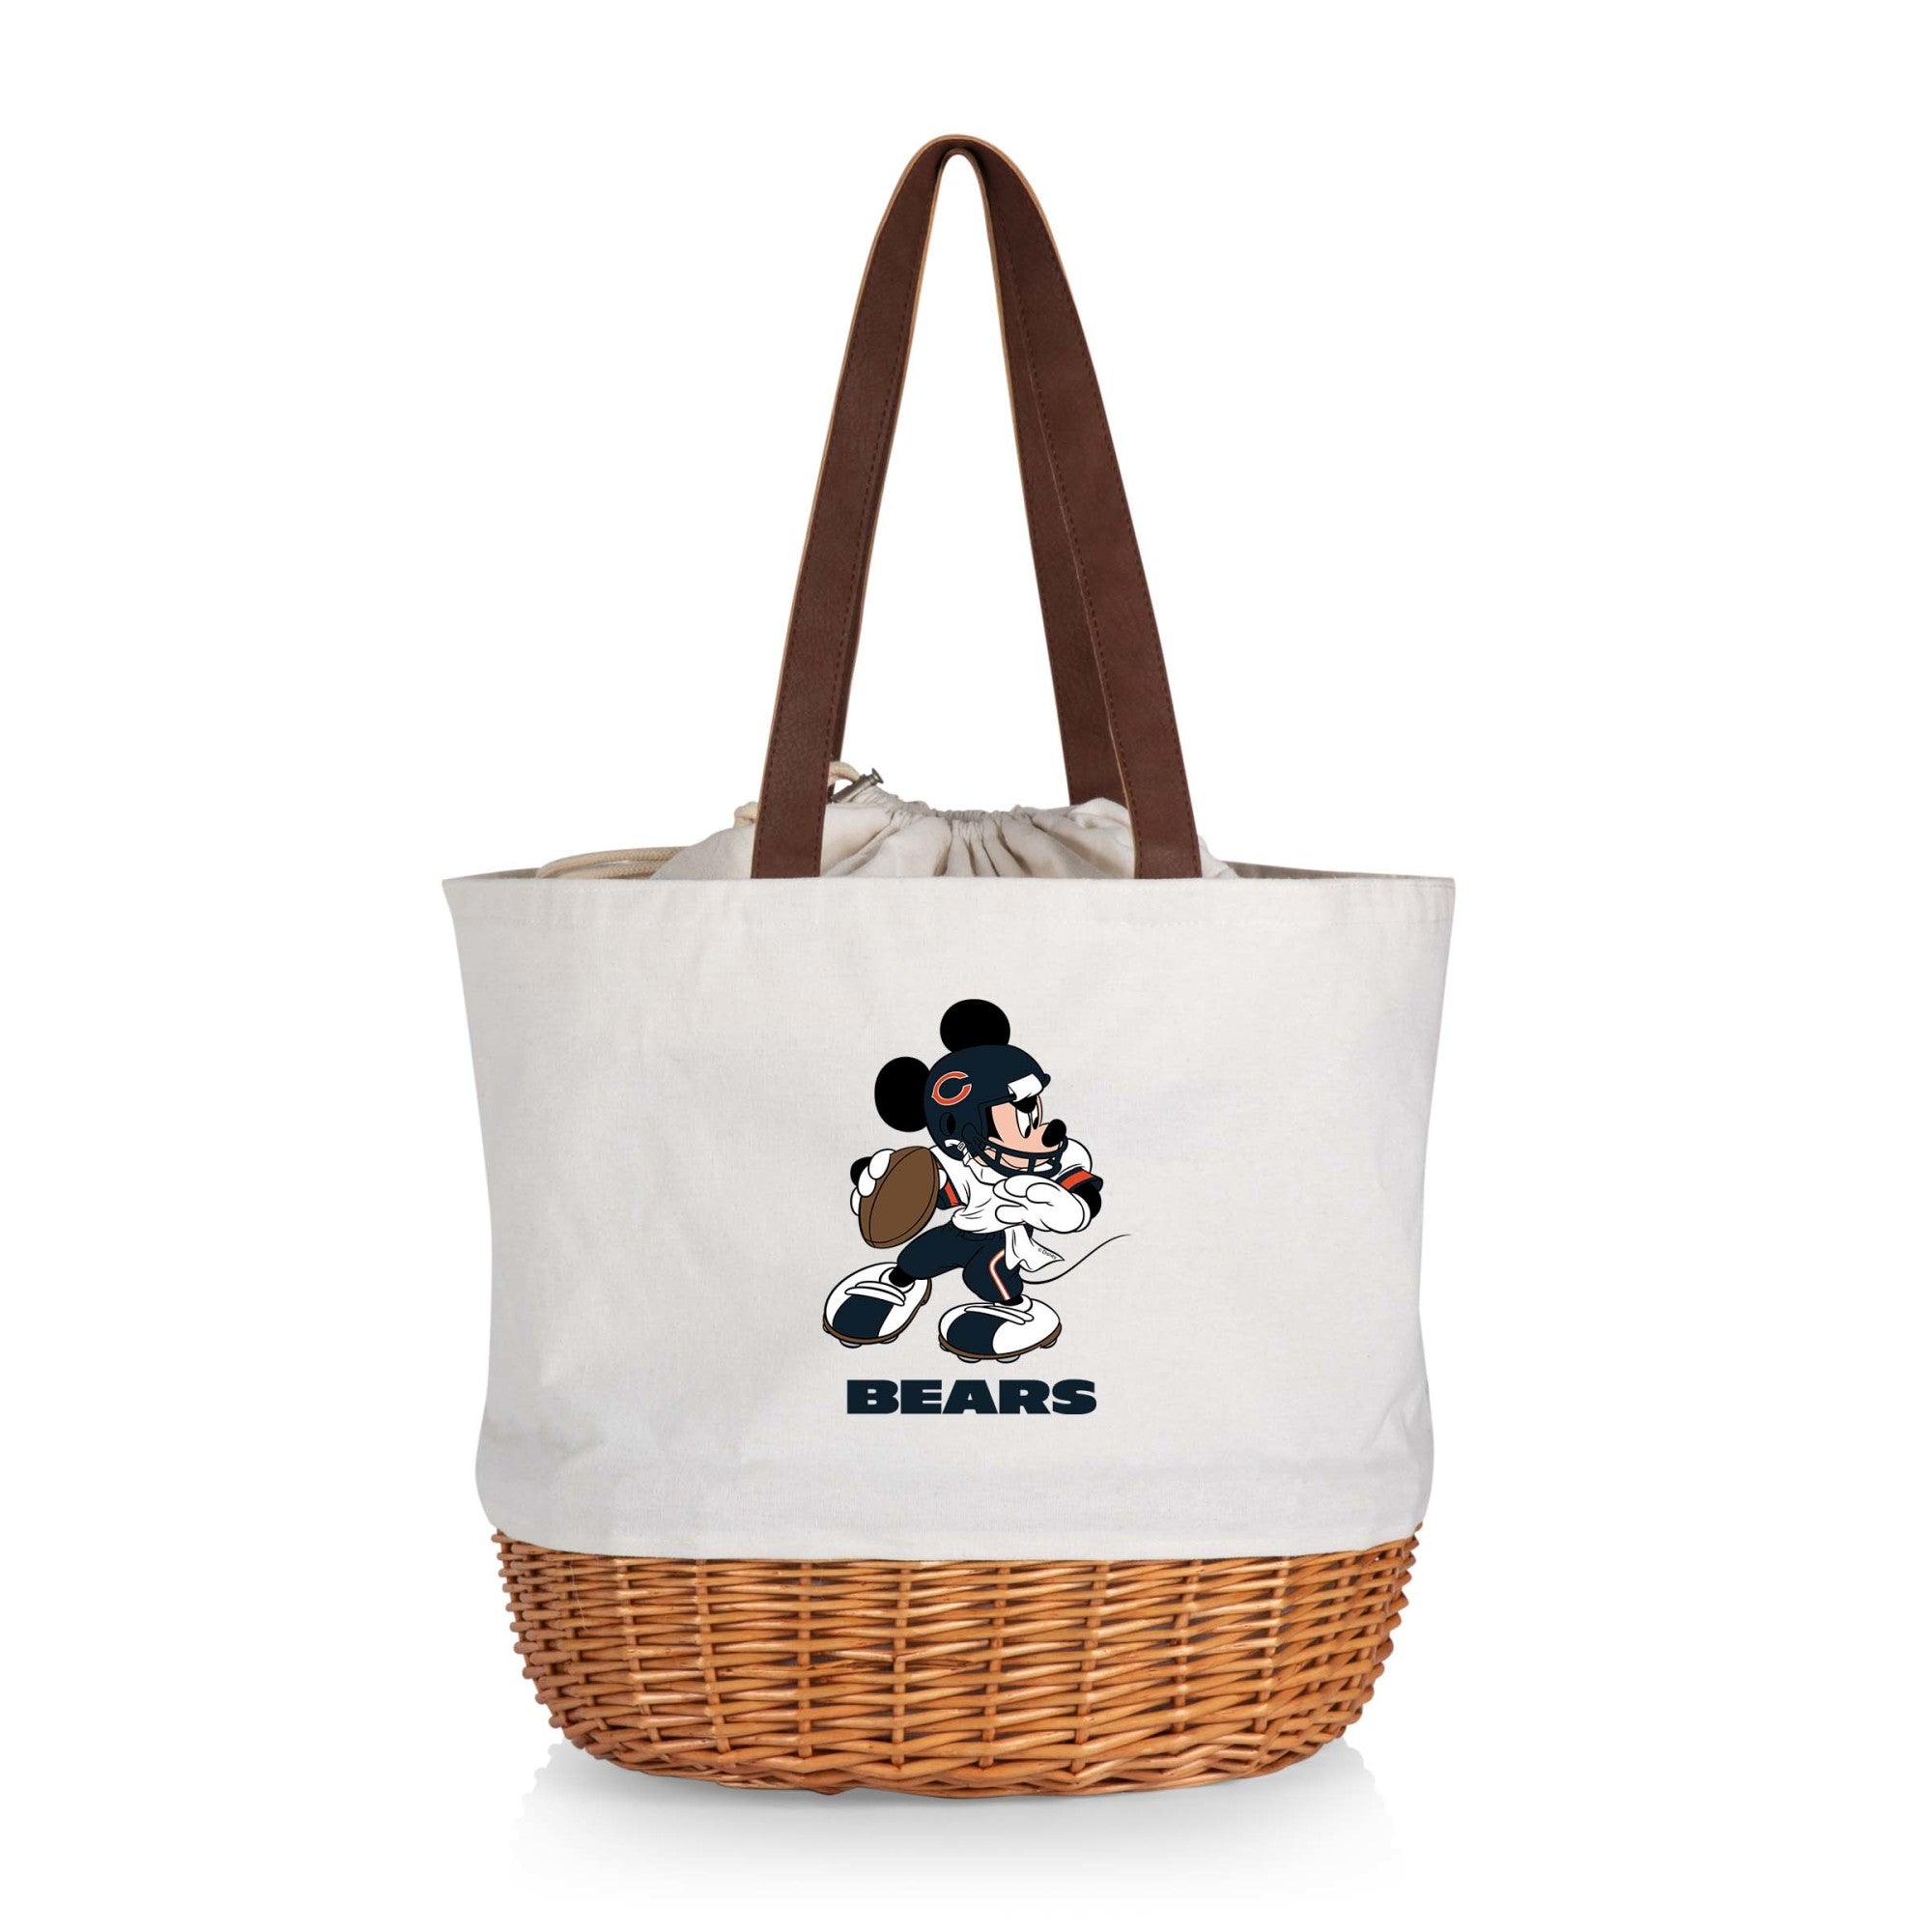 Mickey Mouse - Chicago Bears - Coronado Canvas and Willow Basket Tote